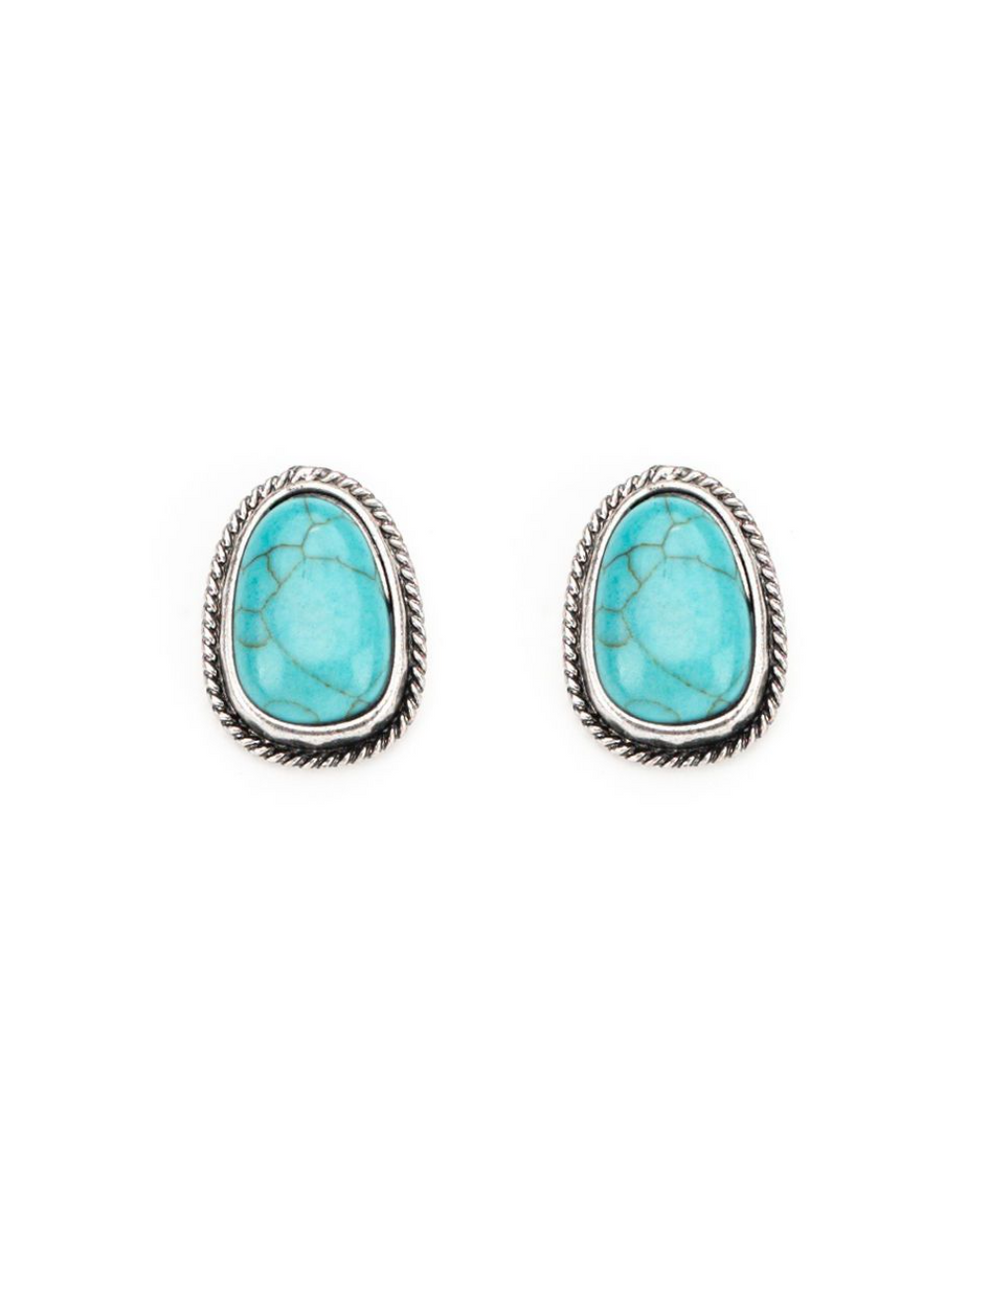 1" Turquoise Post Earring with Burnished Silver Rope Border